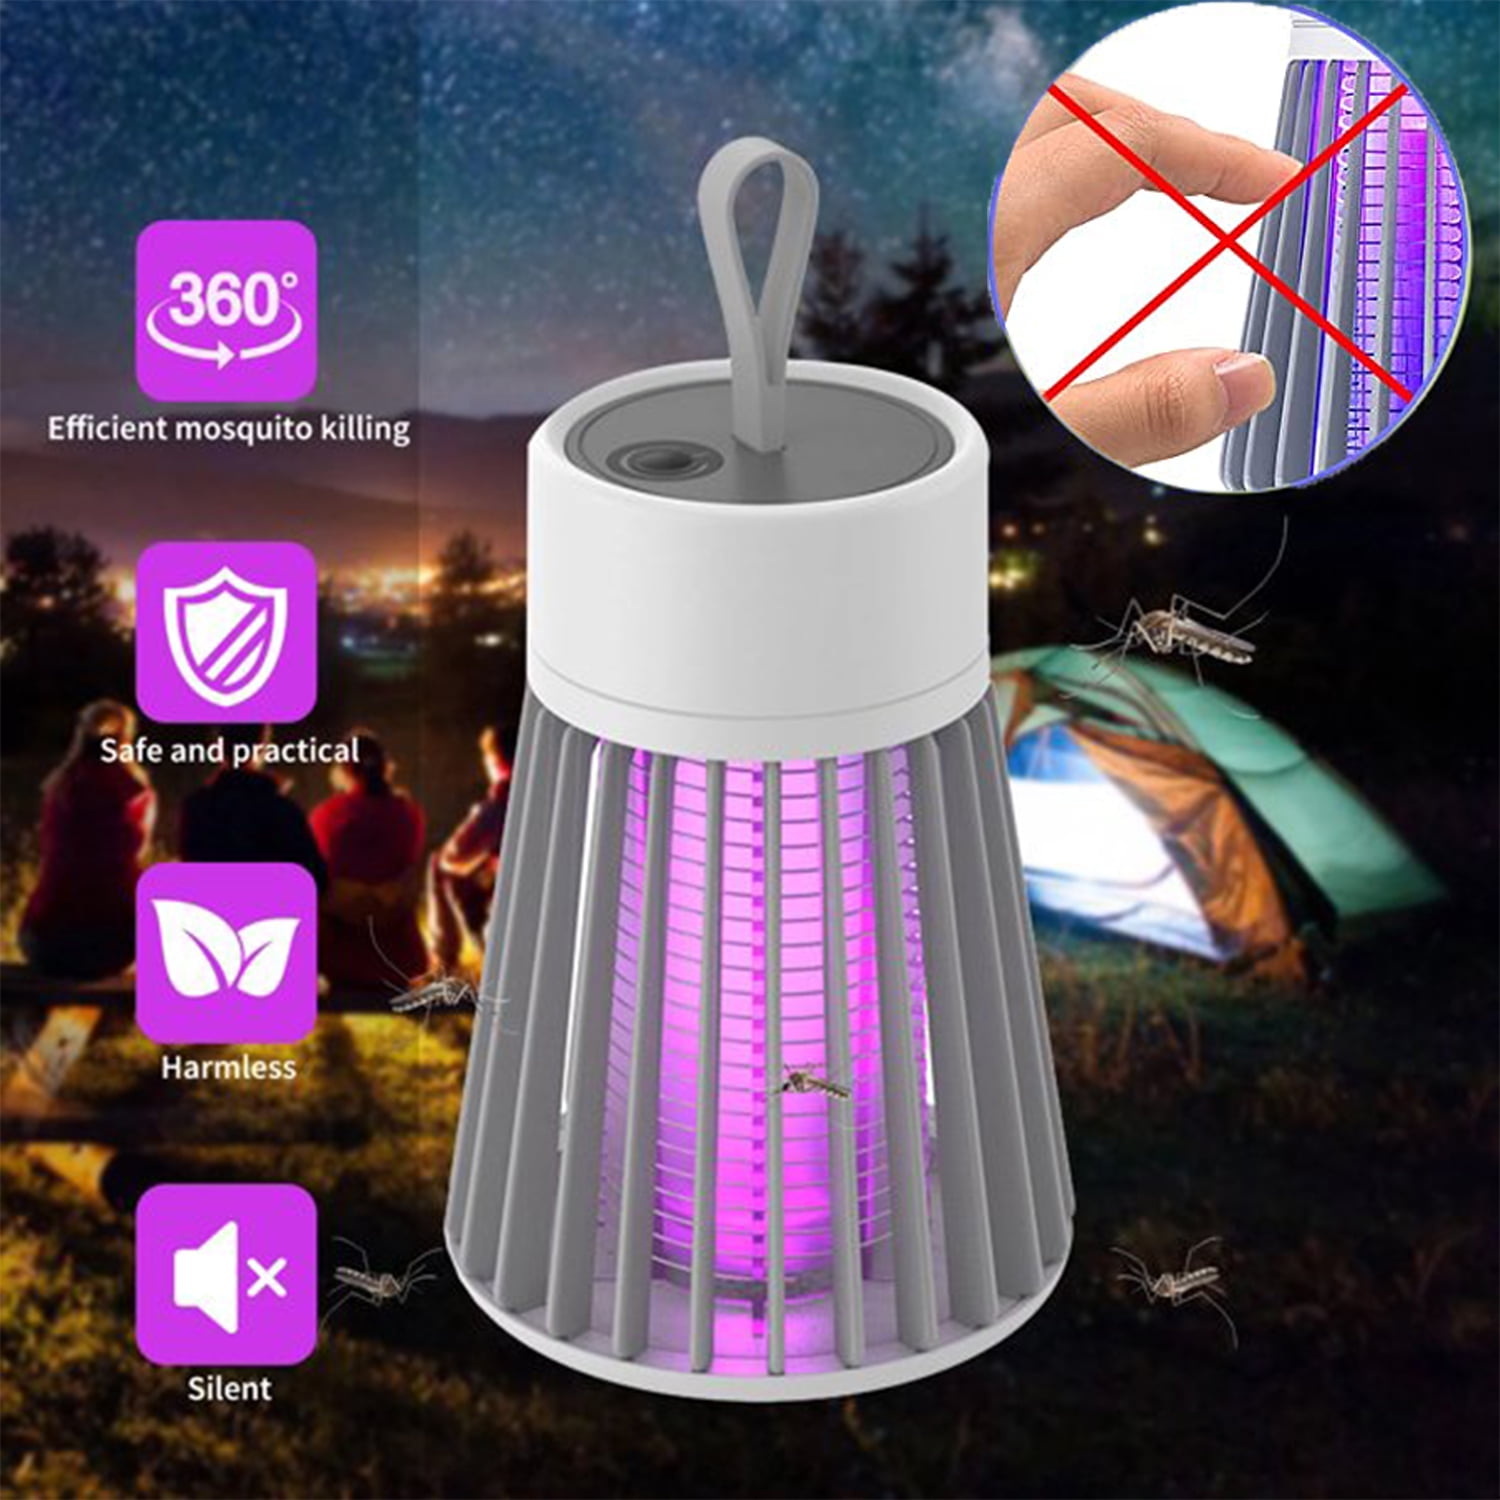 Use for Indoor Bedroom Kitchen Office Bug Zapper Light UV LED Insect Killer Electric Fly Zapper Chemical-Free Nontoxic Odorless Safe for Babies & Pregnant Women 1 Pack WADEO Mosquito Killer Lamp